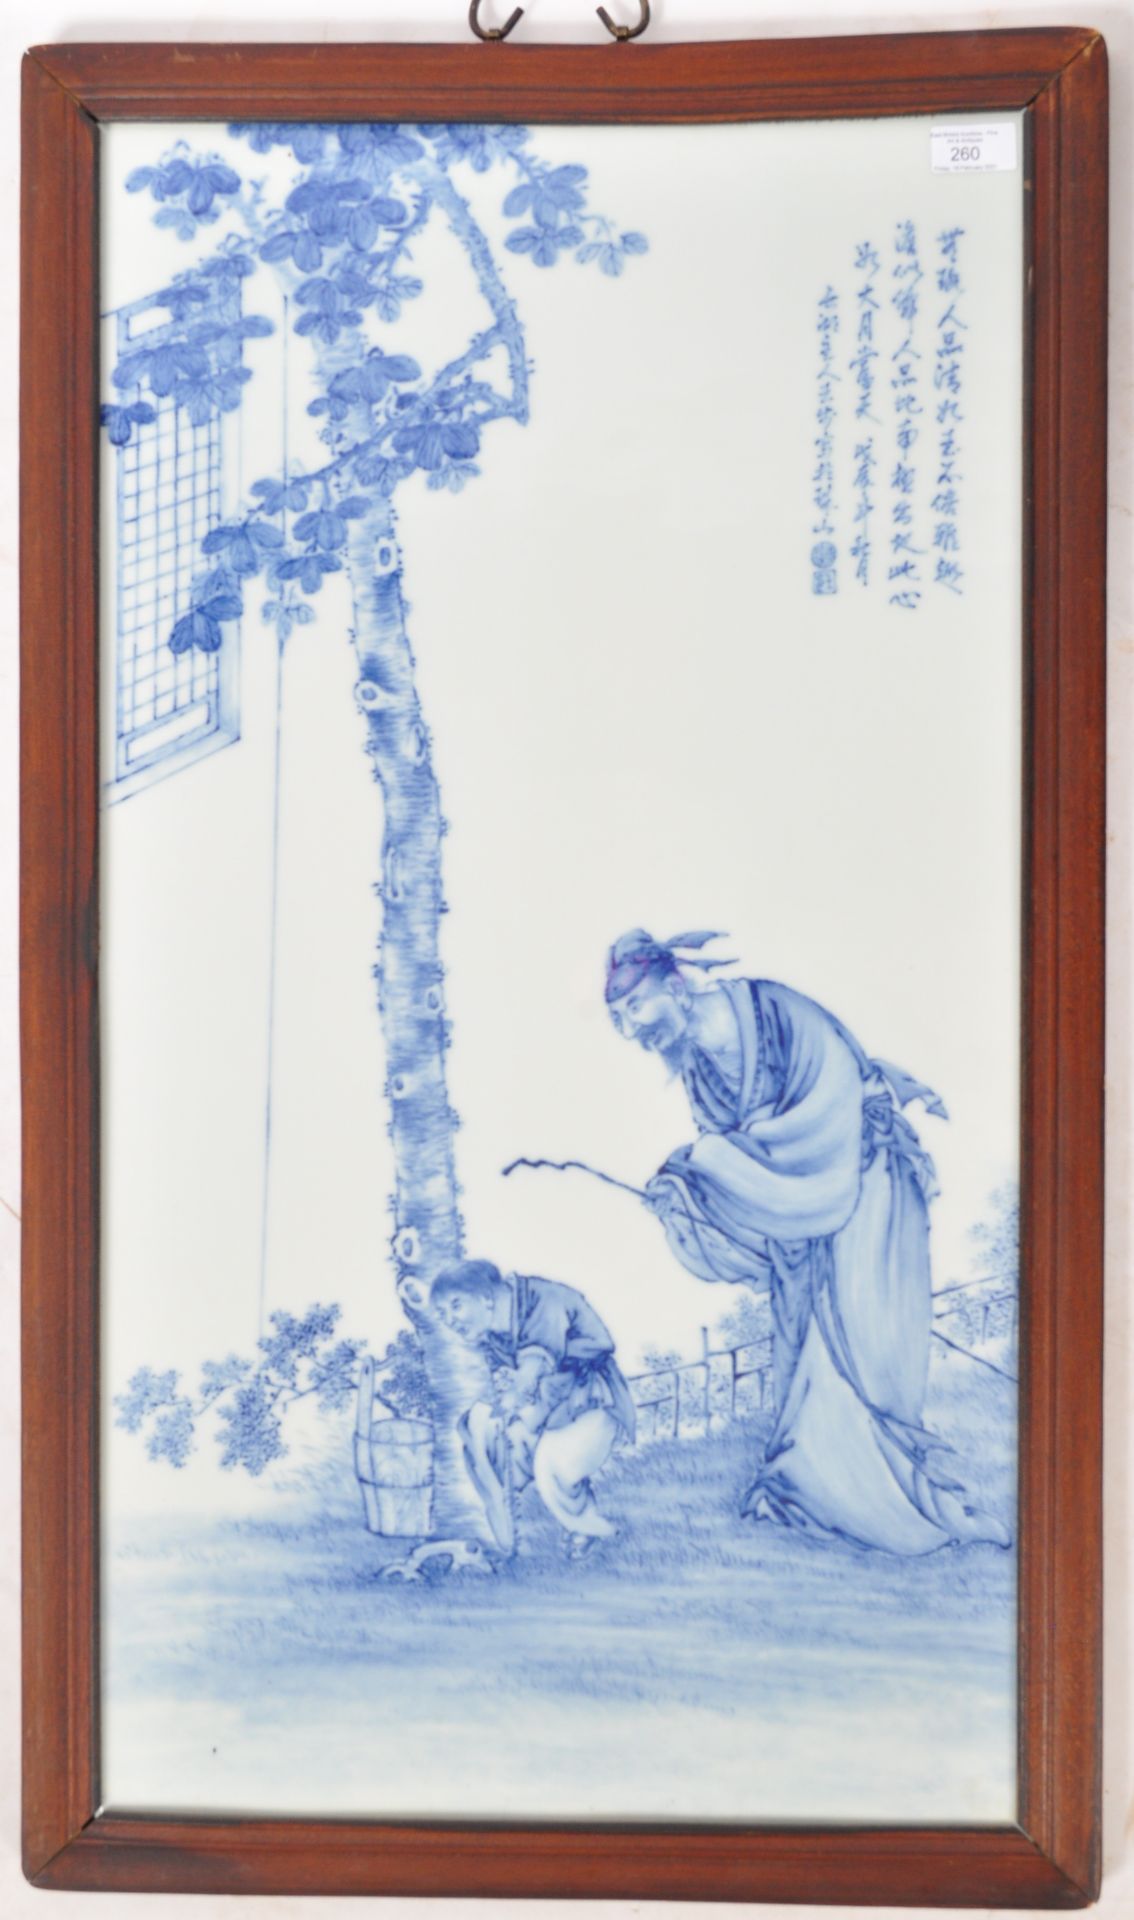 EARLY 20TH CENTURY CHINESE HAND PAINTED BLUE & WHITE PORCELAIN PAINTING